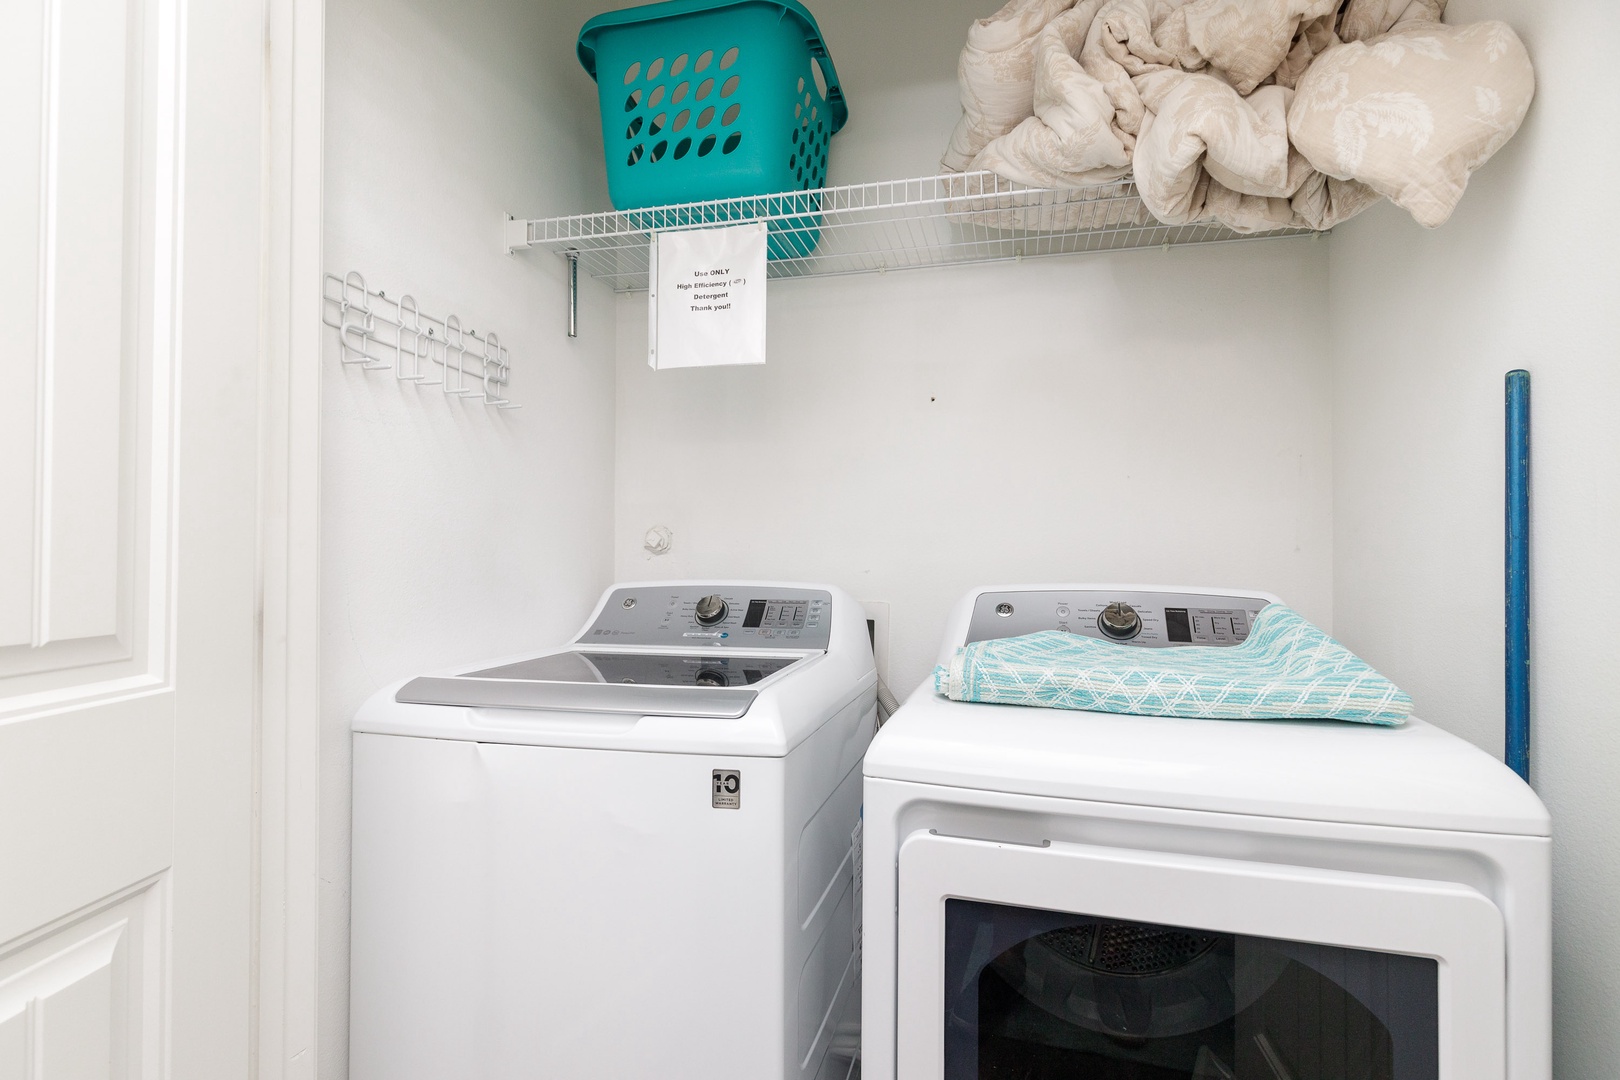 Private laundry is available for your stay, located on the 2nd floor